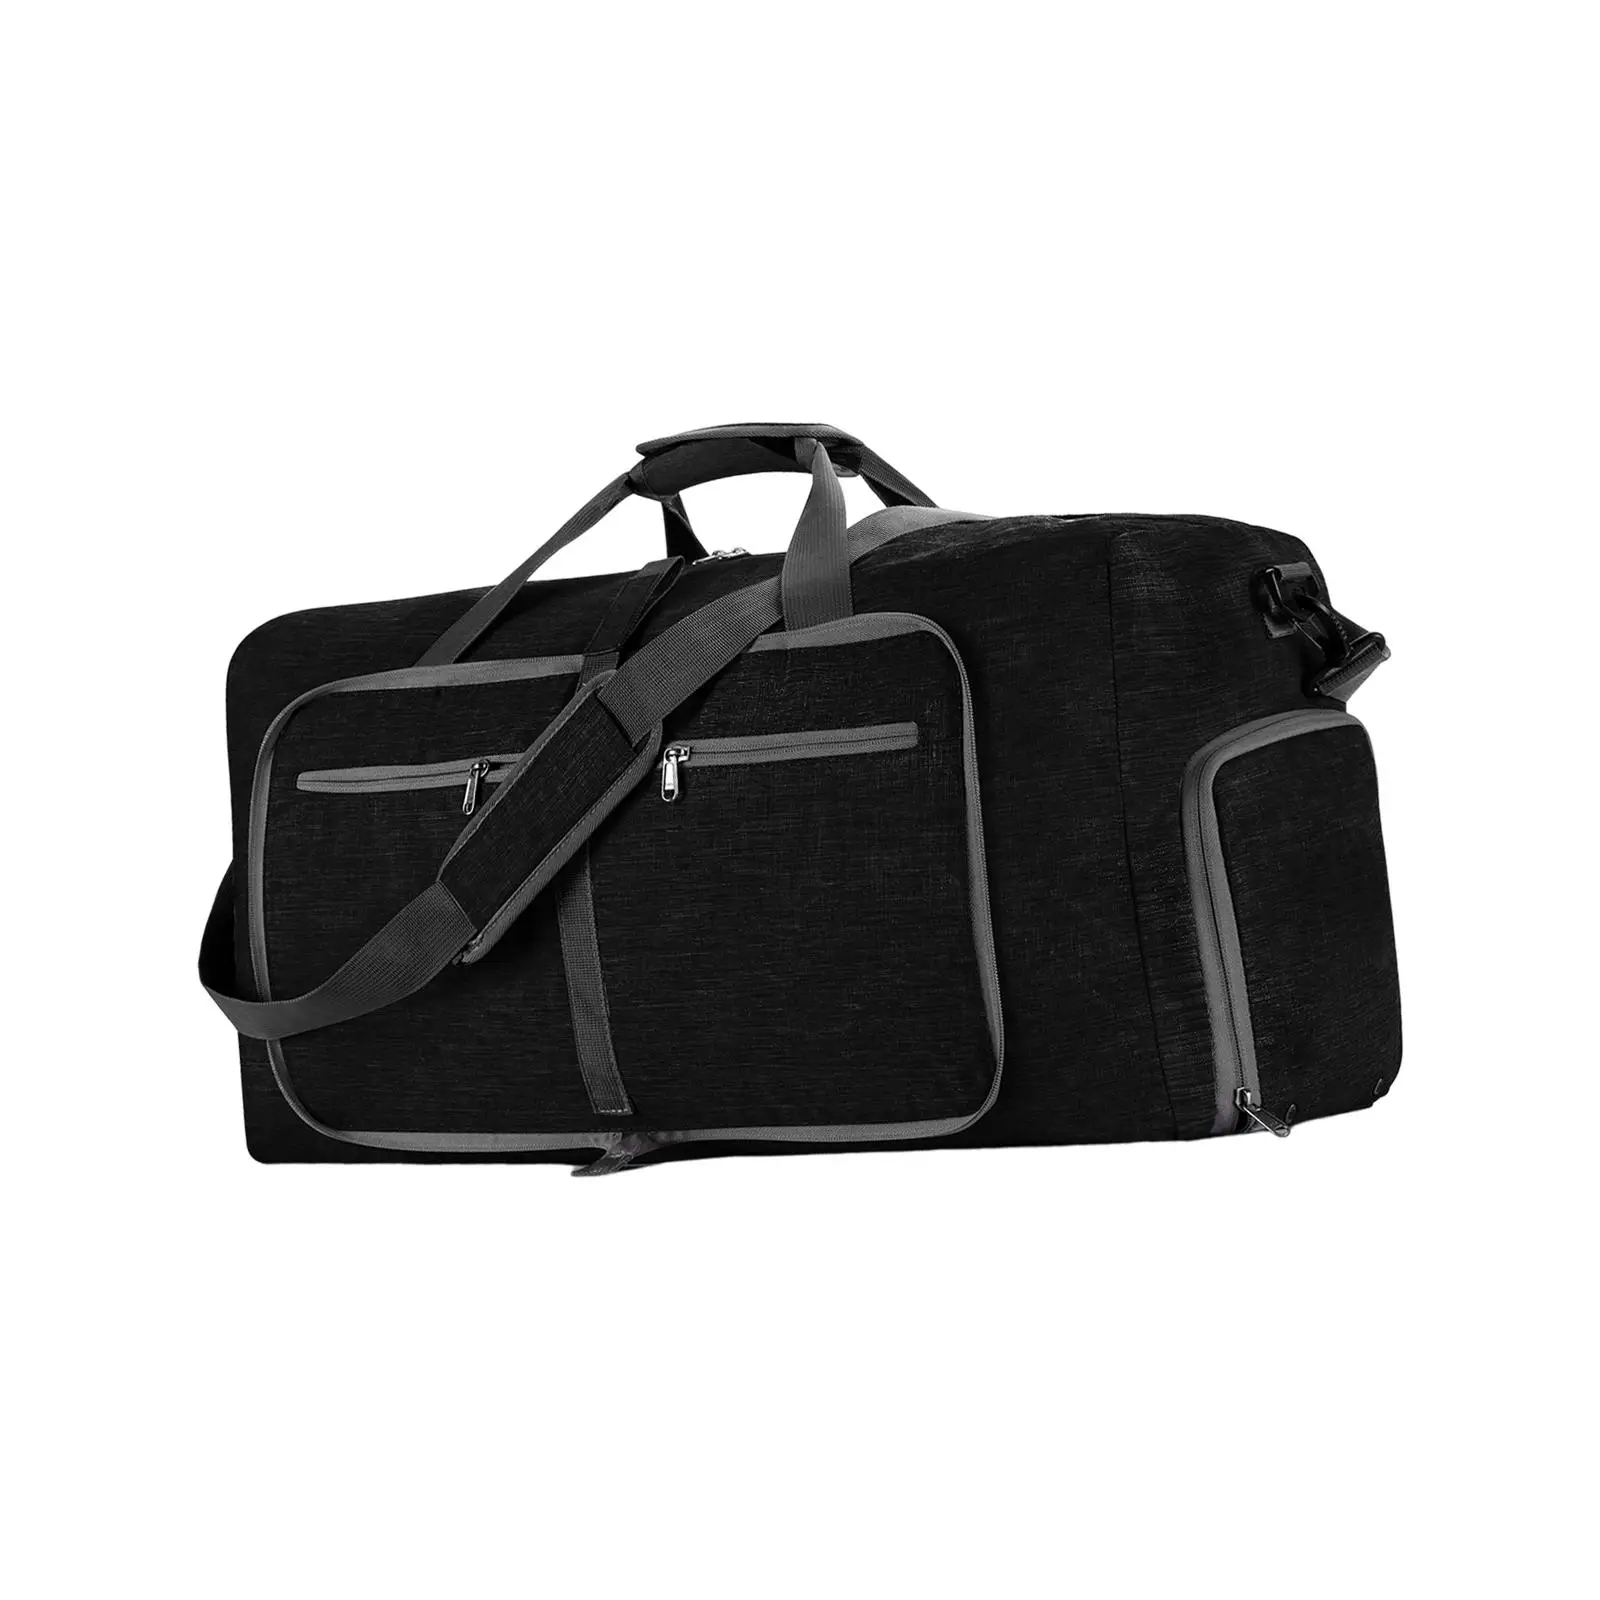 Duffle Bags Weekend Bag Foldable Sports Travel Luggage for Men Women Camping